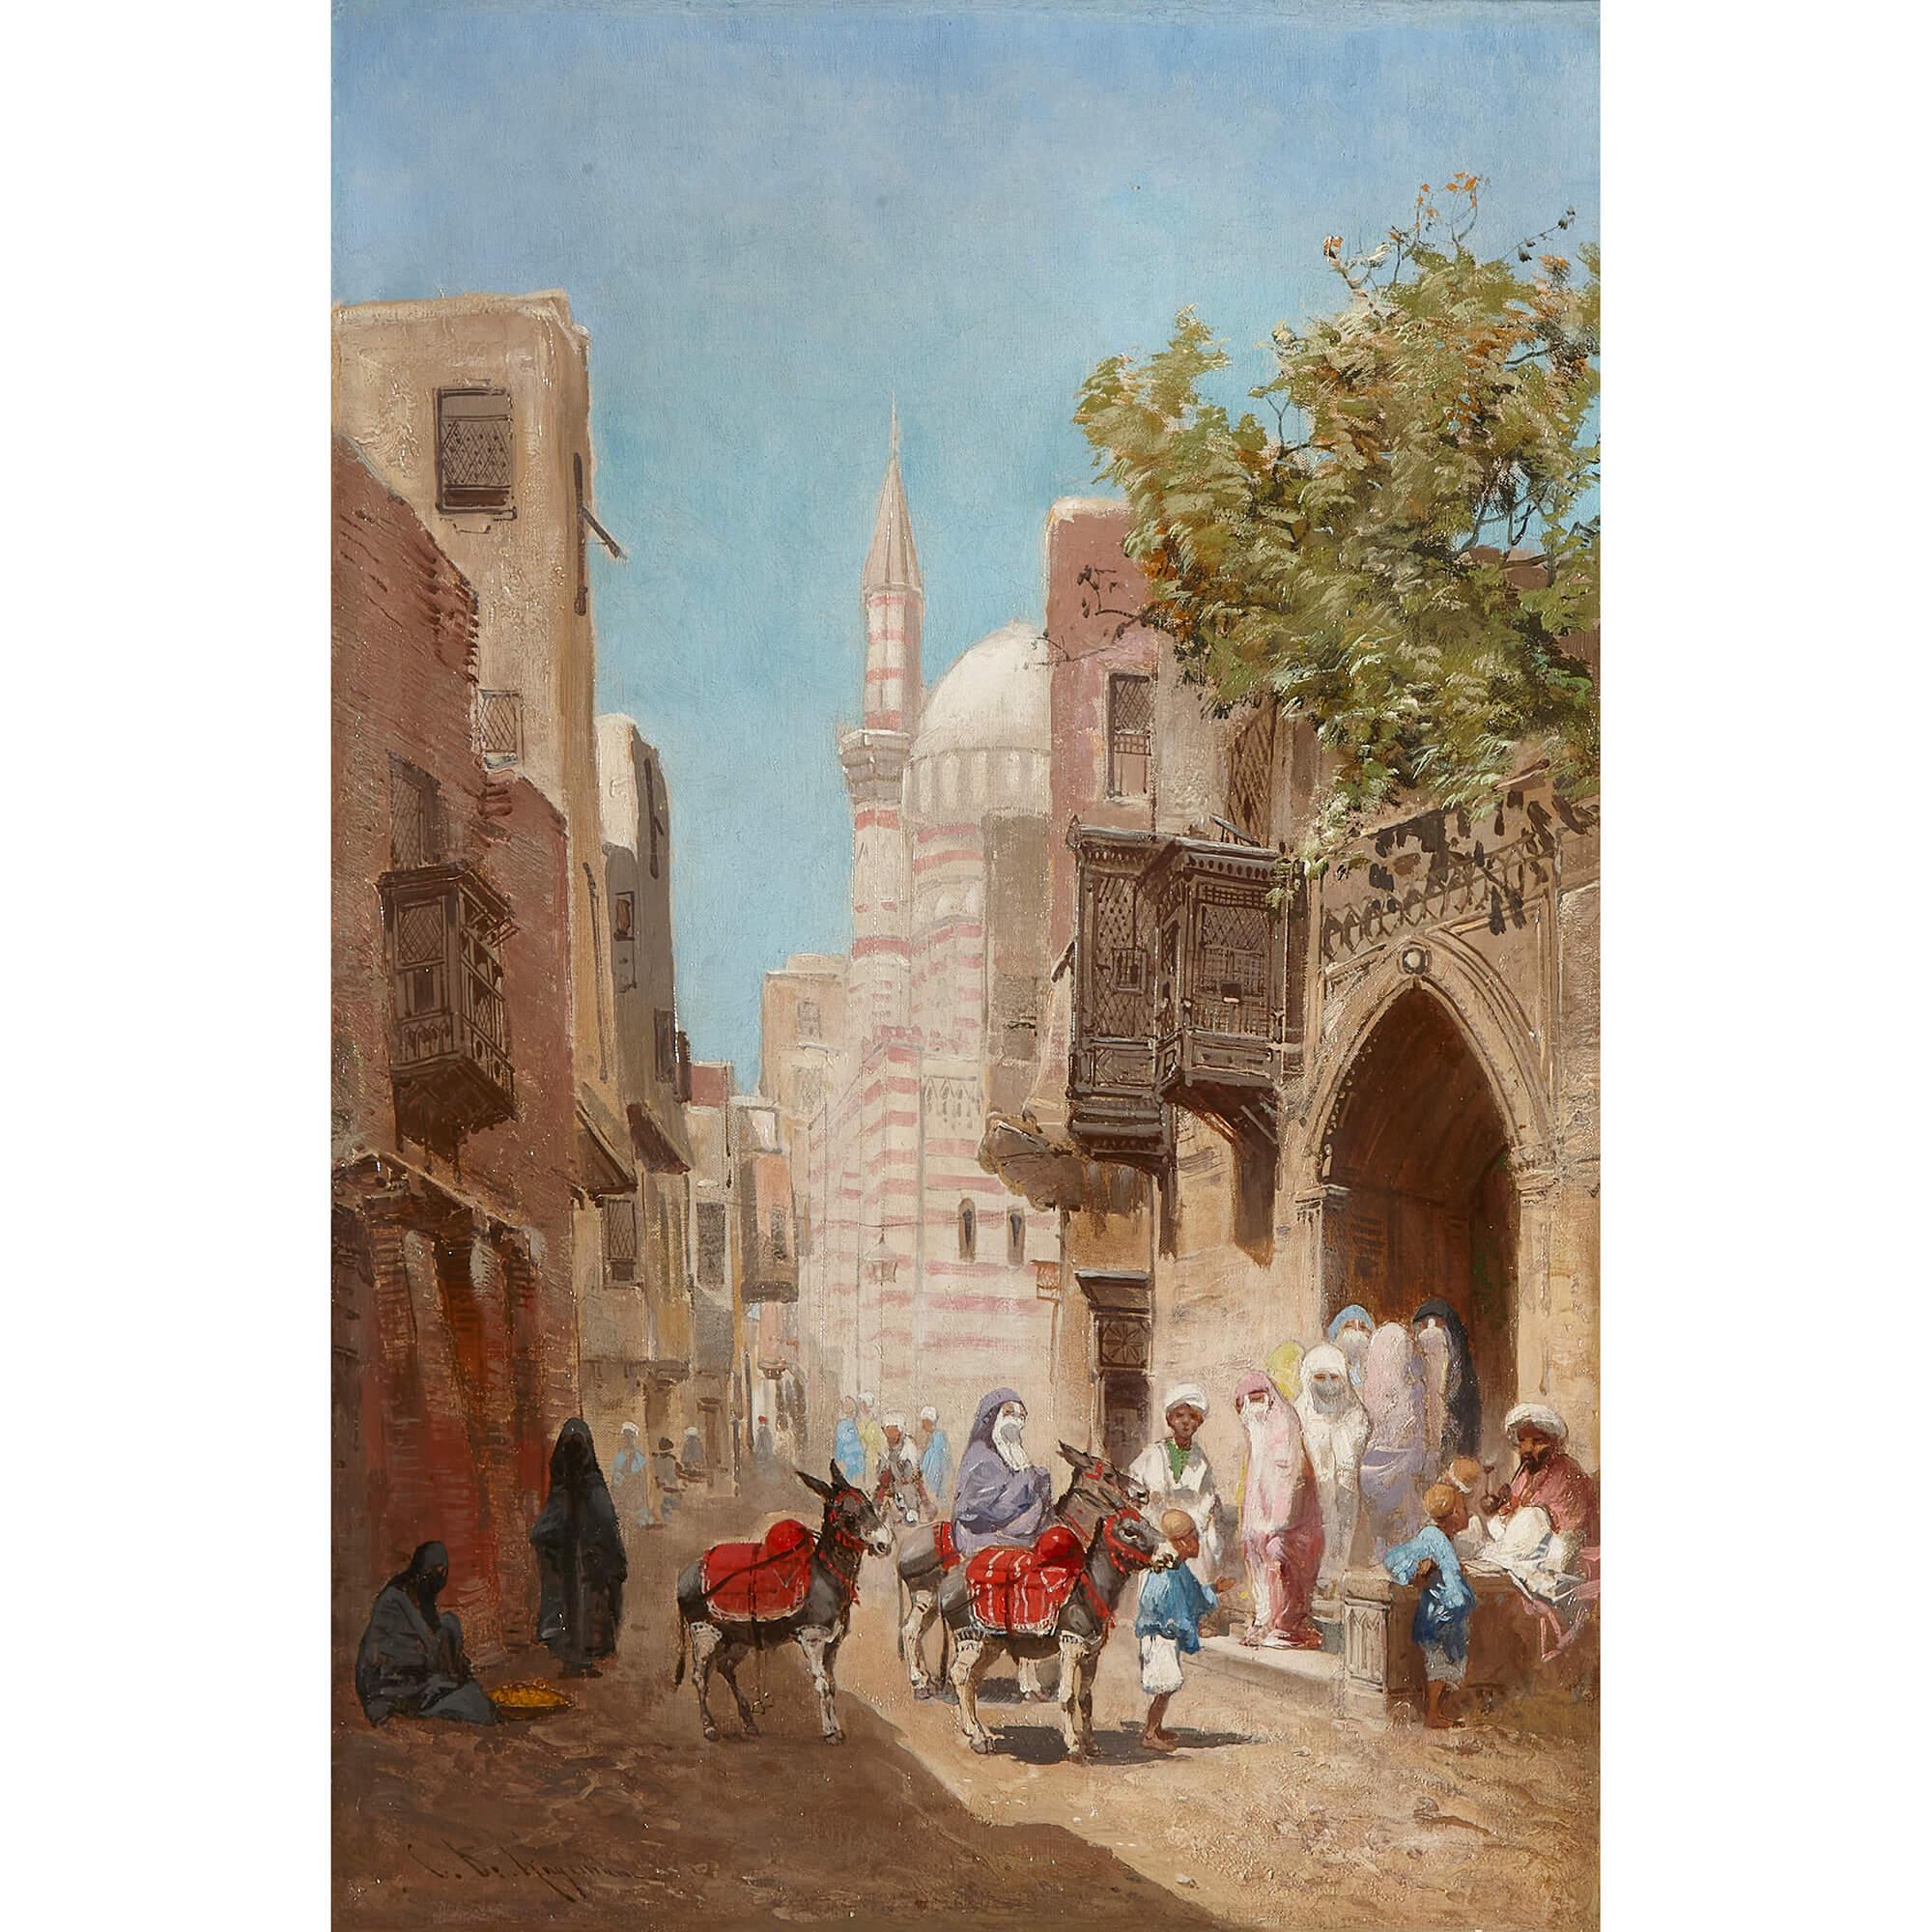 Pair of antique Orientalist oil paintings by de Hagemann	
French, 19th Century 
Canvas: Height 44cm, width 29.5cm, depth 2cm
Frames: Height 64cm, width  50cm, depth 4.5cm

Crafted by renowned French Orientalist Godefroy de Hagemann (1820-1877), this